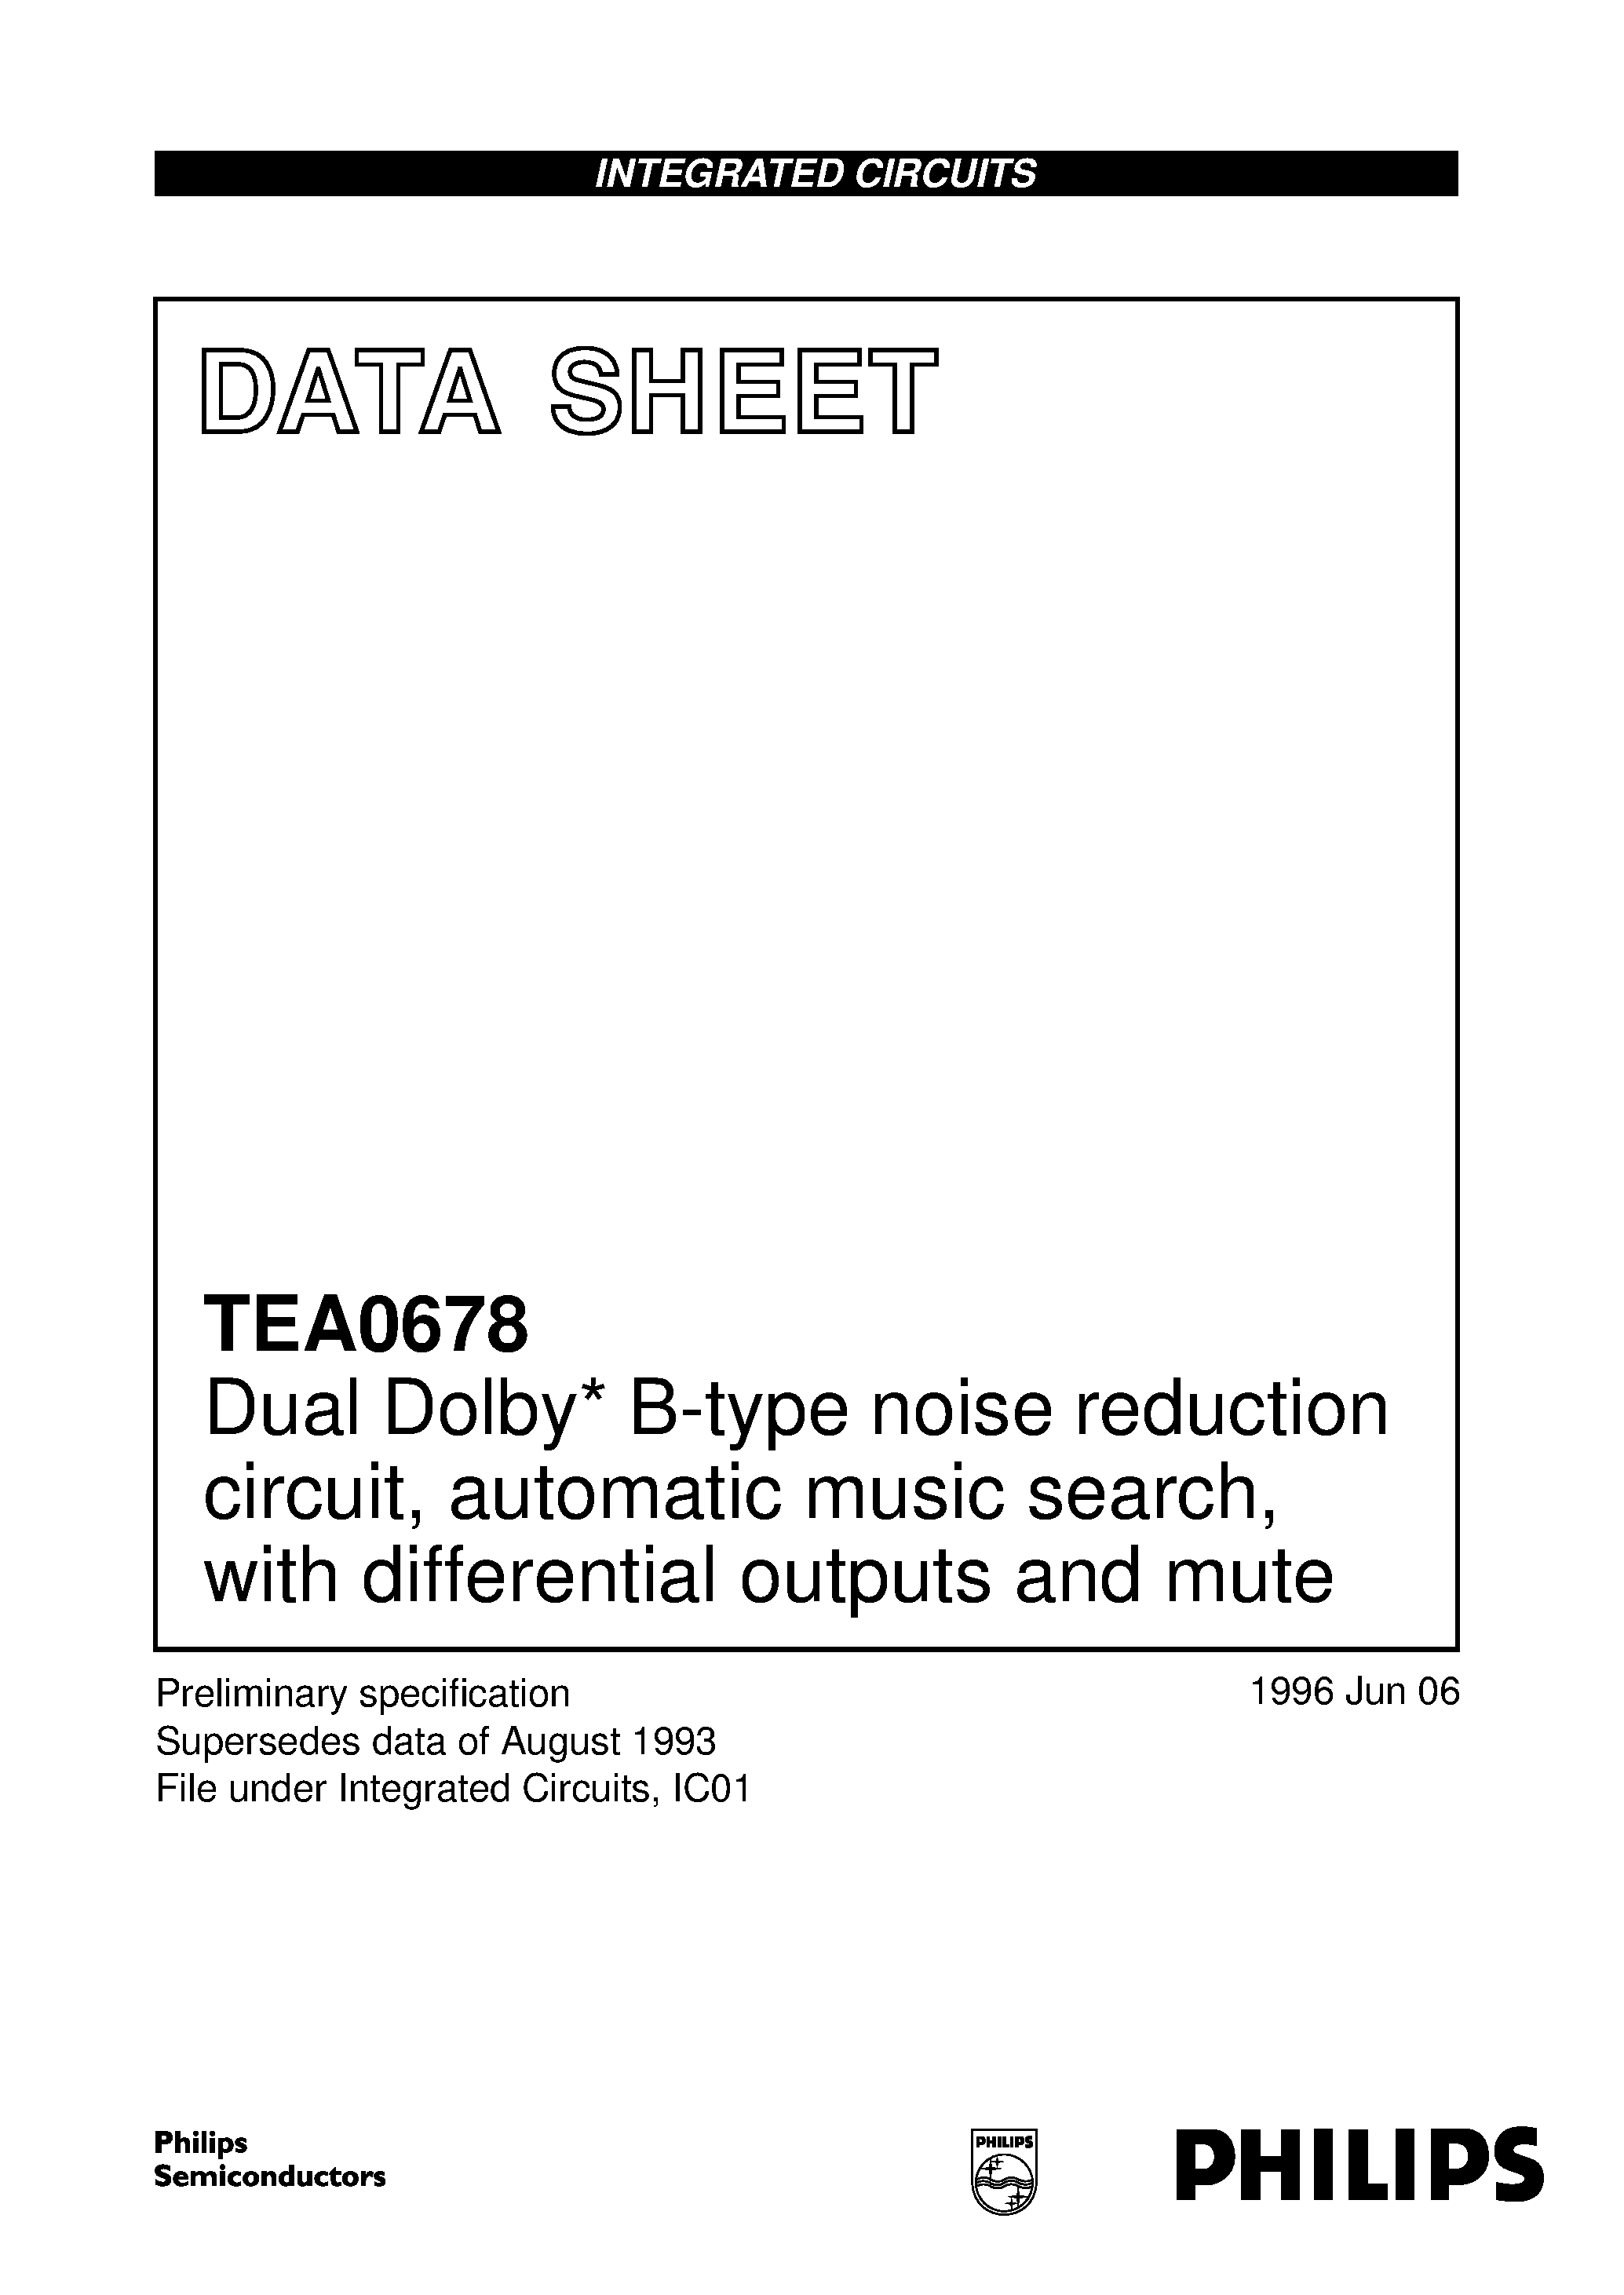 Даташит TEA0678 - Dual Dolby* B-type noise reduction circuit/ automatic music search/ with differential outputs and mute страница 1